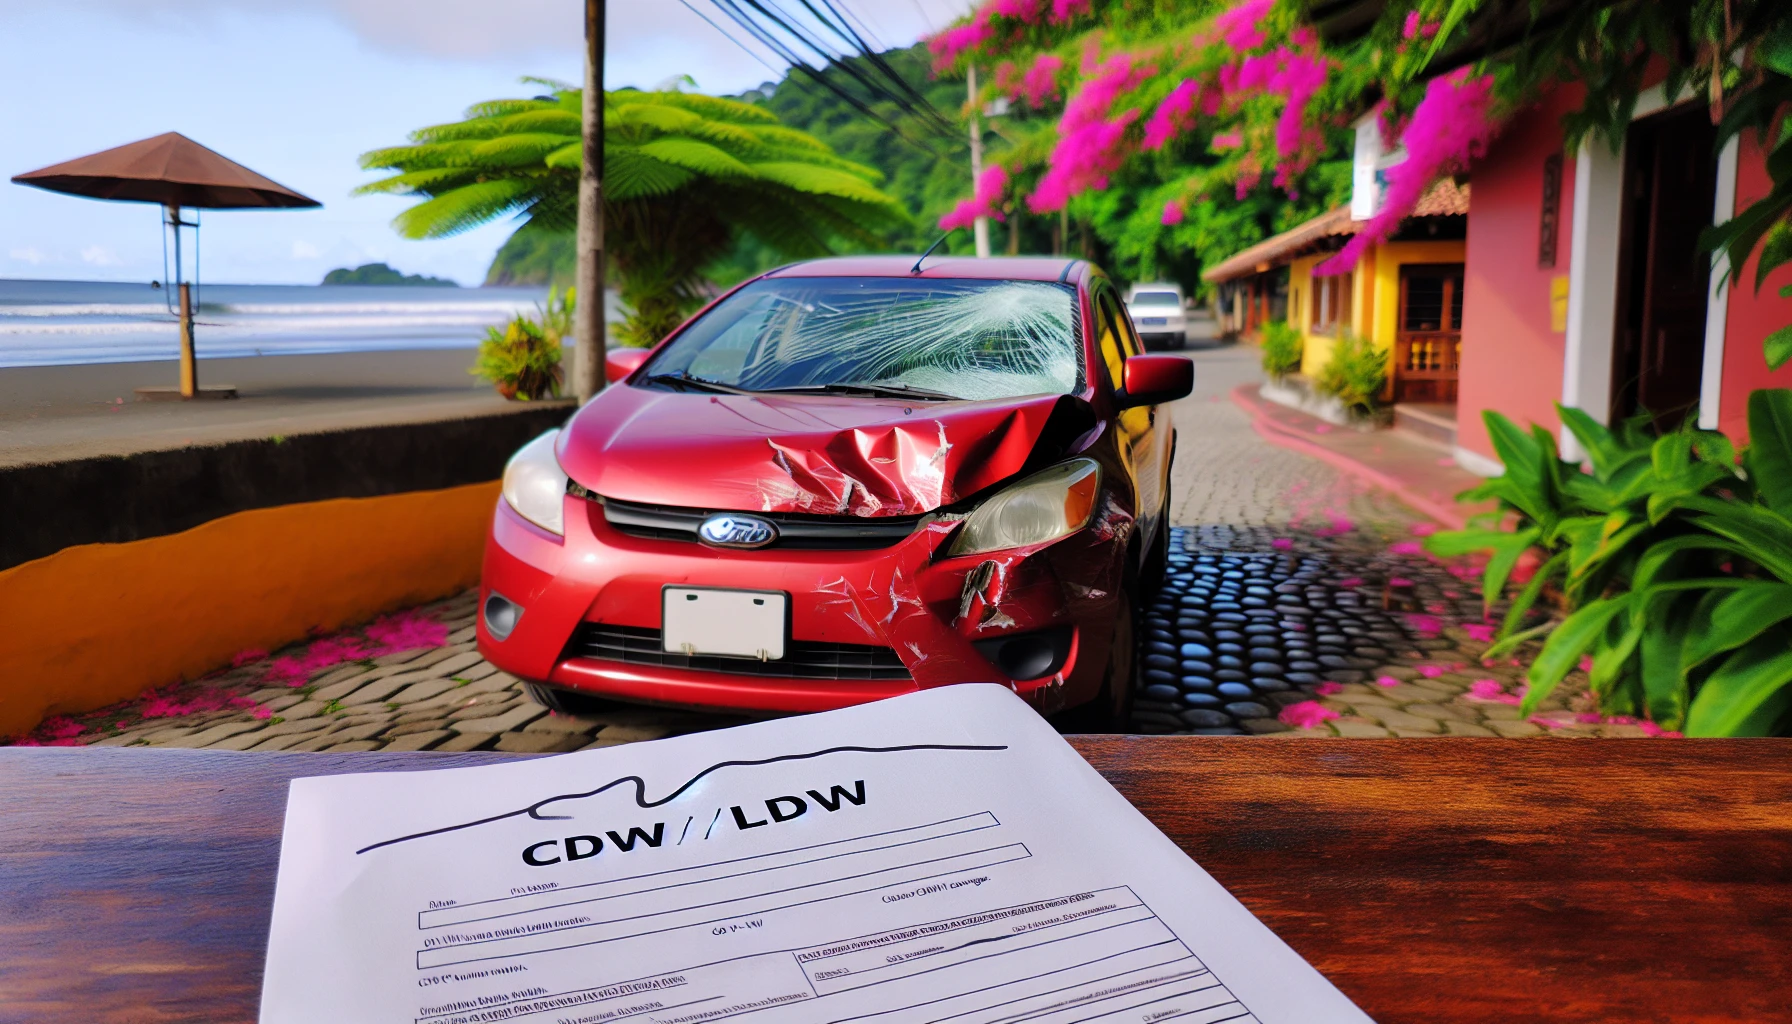 Collision Damage Waiver (CDW) and Loss Damage Waiver (LDW)